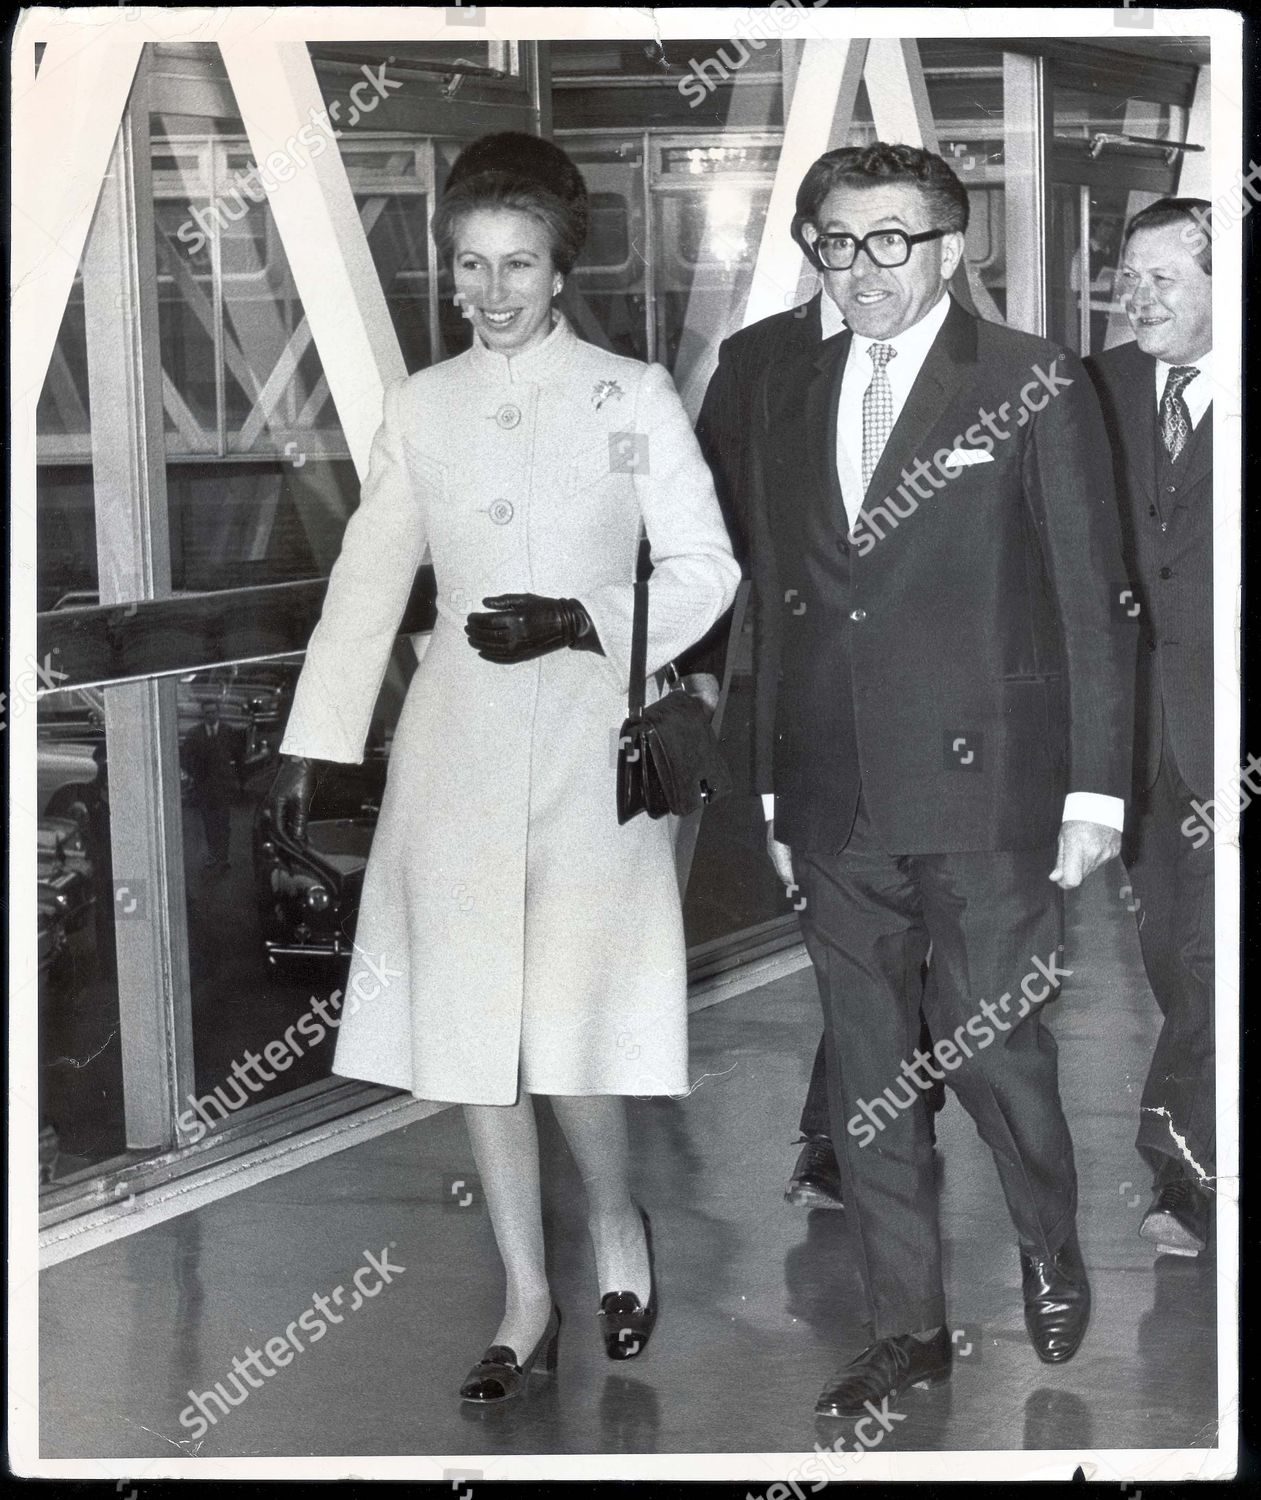 princess-anne-now-princess-royal-april-1975-princess-anne-with-mr-percy-whitford-deputy-chairman-of-the-b-a-a-princess-anne-at-the-airport-this-evening-before-leaving-for-australia-is-greeted-by-mr-percy-whitford-deputy-director-of-the-british-a-shutterstock-editorial-891740a.jpg